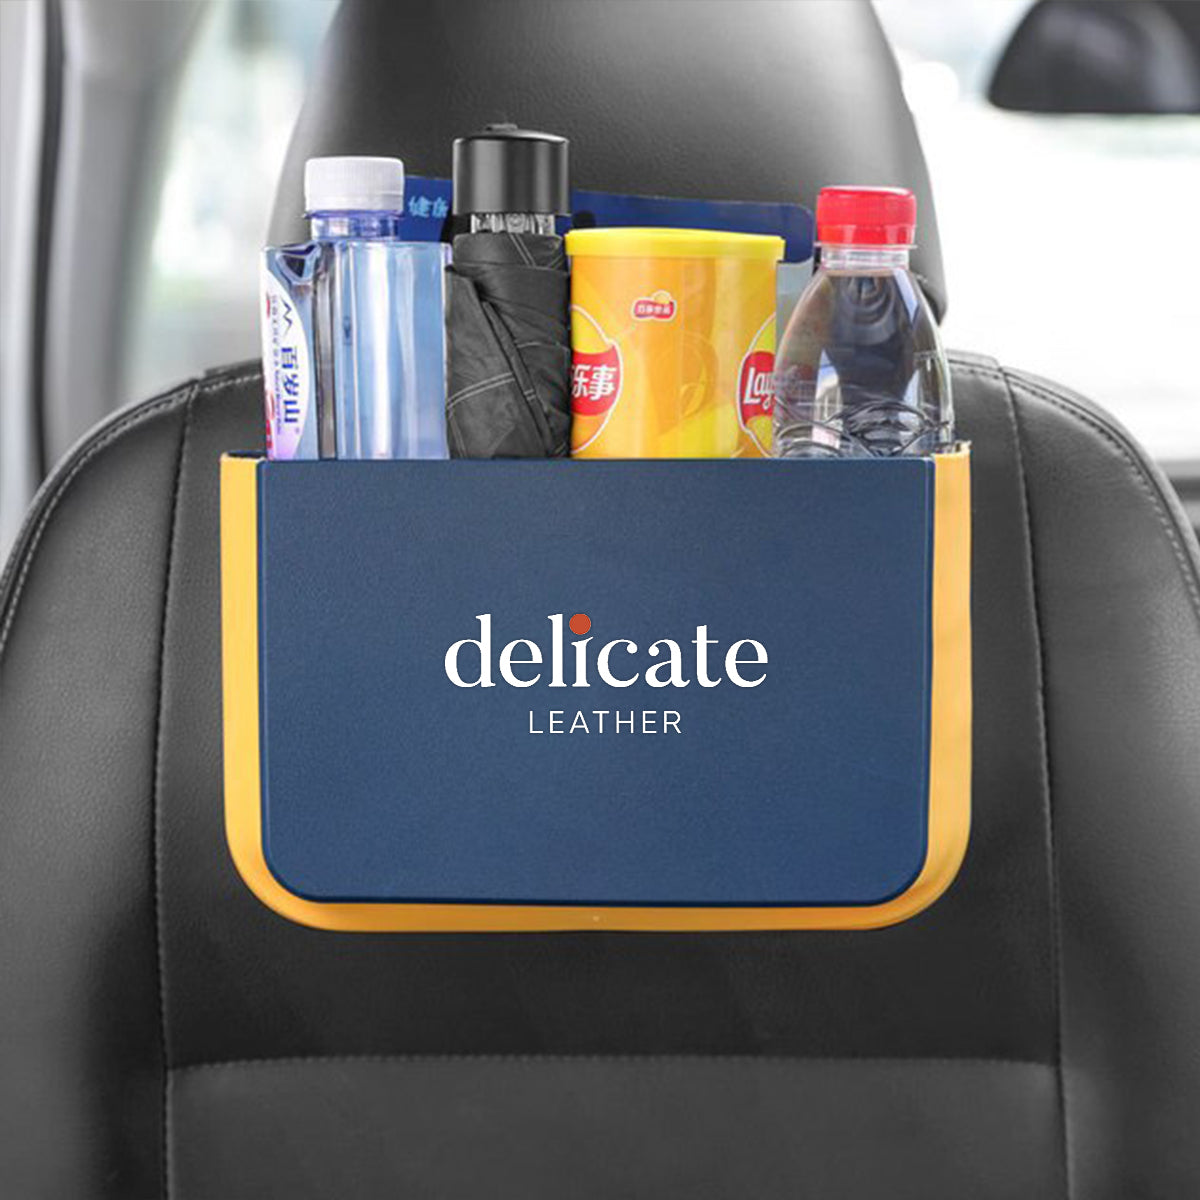 Hanging Waterproof Car Trash can-Foldable, Custom For Your Cars, Waterproof, and Equipped with Cup Holders and Trays. Multi-Purpose, Car Accessories HY11992 - Delicate Leather